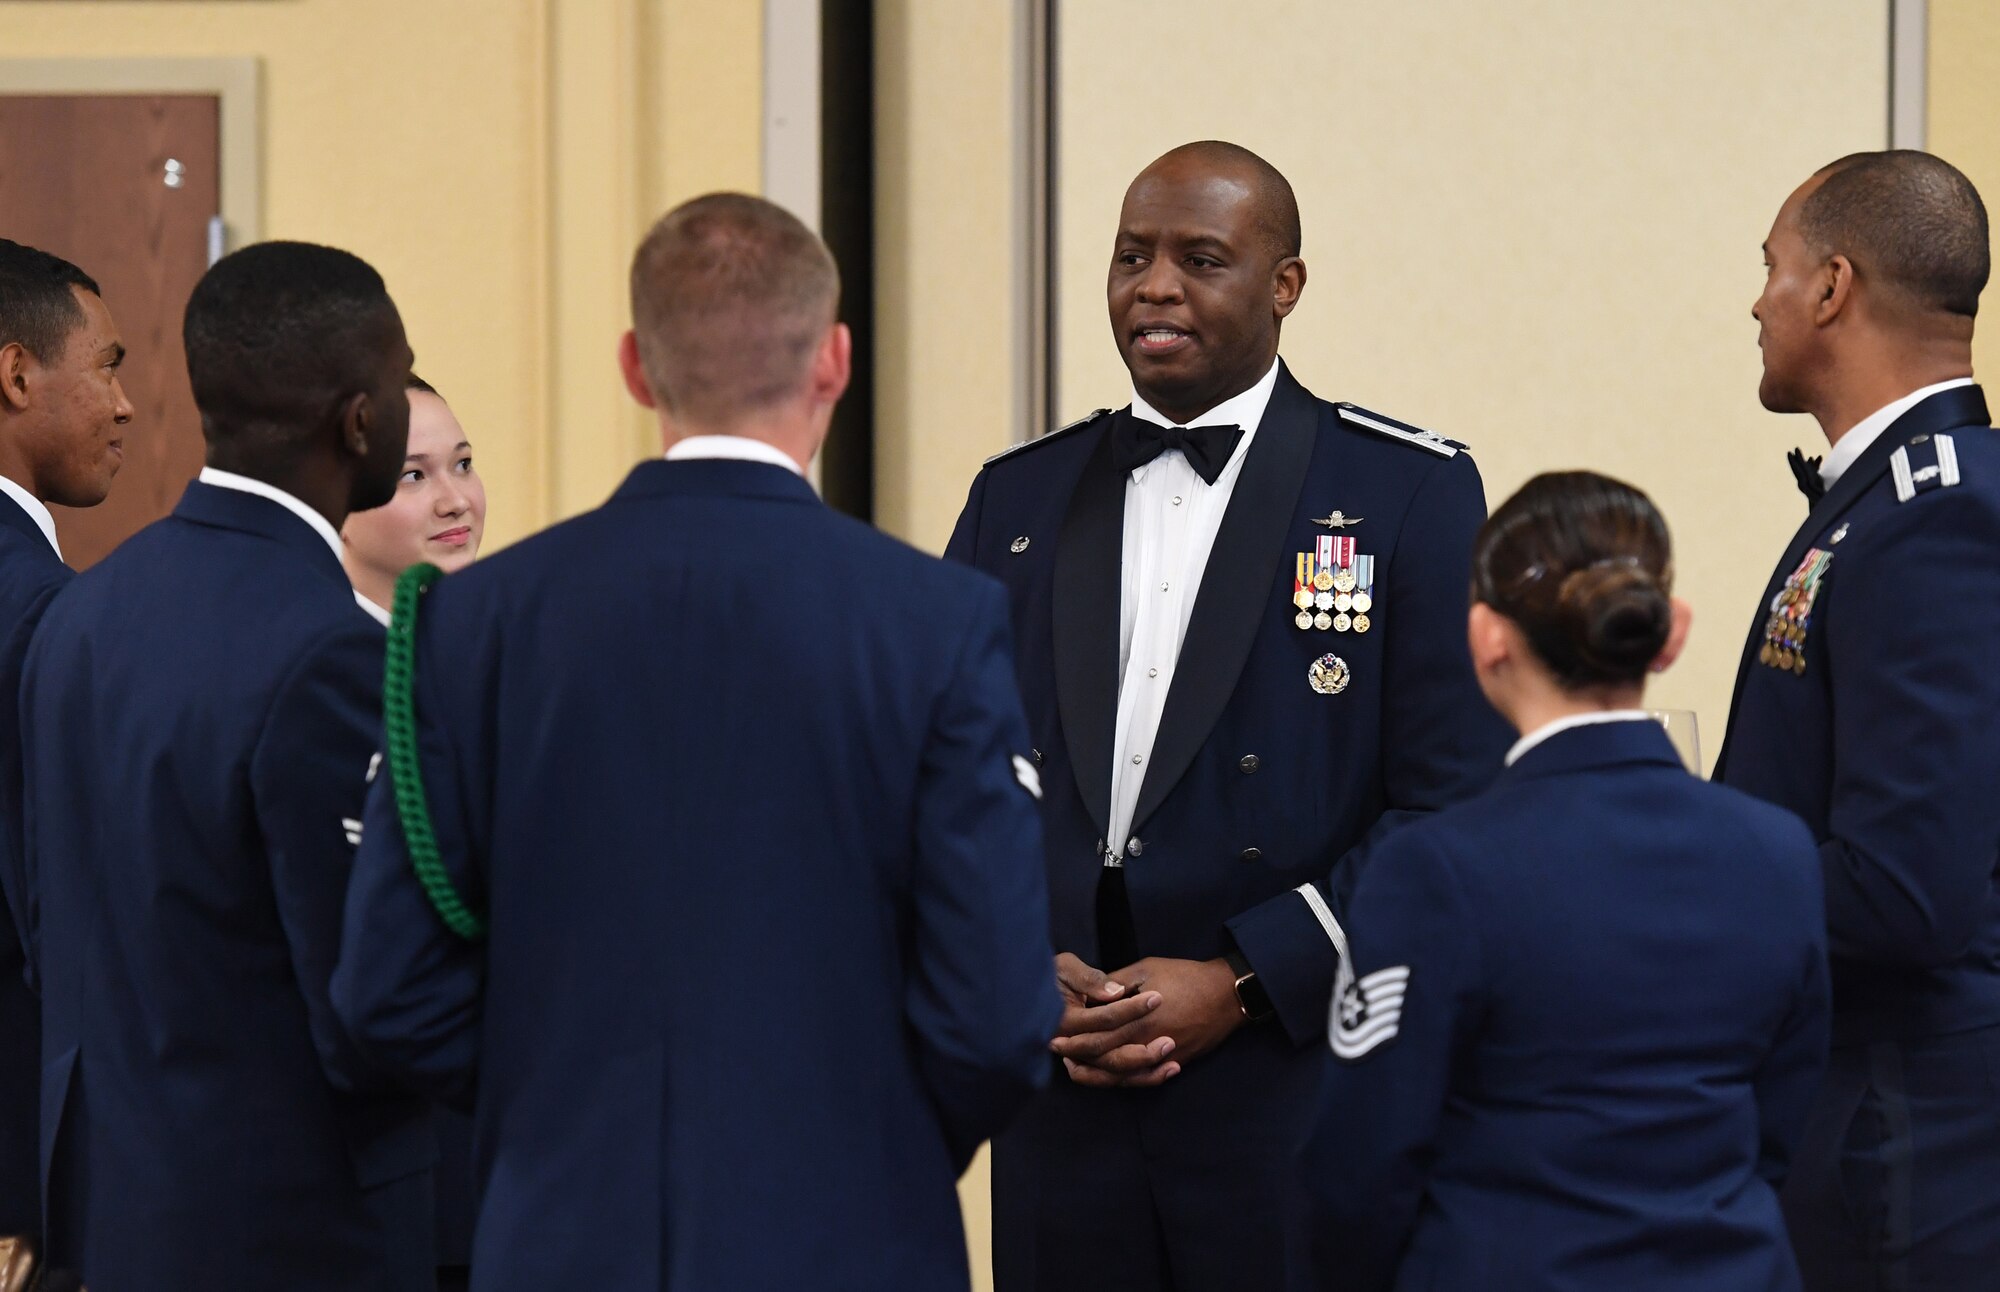 U.S. Air Force Col. Leo Lawson, Jr., 81st Training Group commander, speaks with Airmen during the Airmen In Training Ball at the Bay Breeze Event Center on Keesler Air Force Base, Mississippi, April 19, 2019. The event, hosted by the 81st TRG, is the first of its kind and was  geared toward training Airmen on how to participate and act during a formal military ball so they can feel confident in their abilities when arriving at their follow-on locations. The Airmen served in key positions throughout the ball such as emcees, color guard, POW/MIA table ceremony, national anthem singer and the invocation. (U.S. Air Force photo by Kemberly Groue)